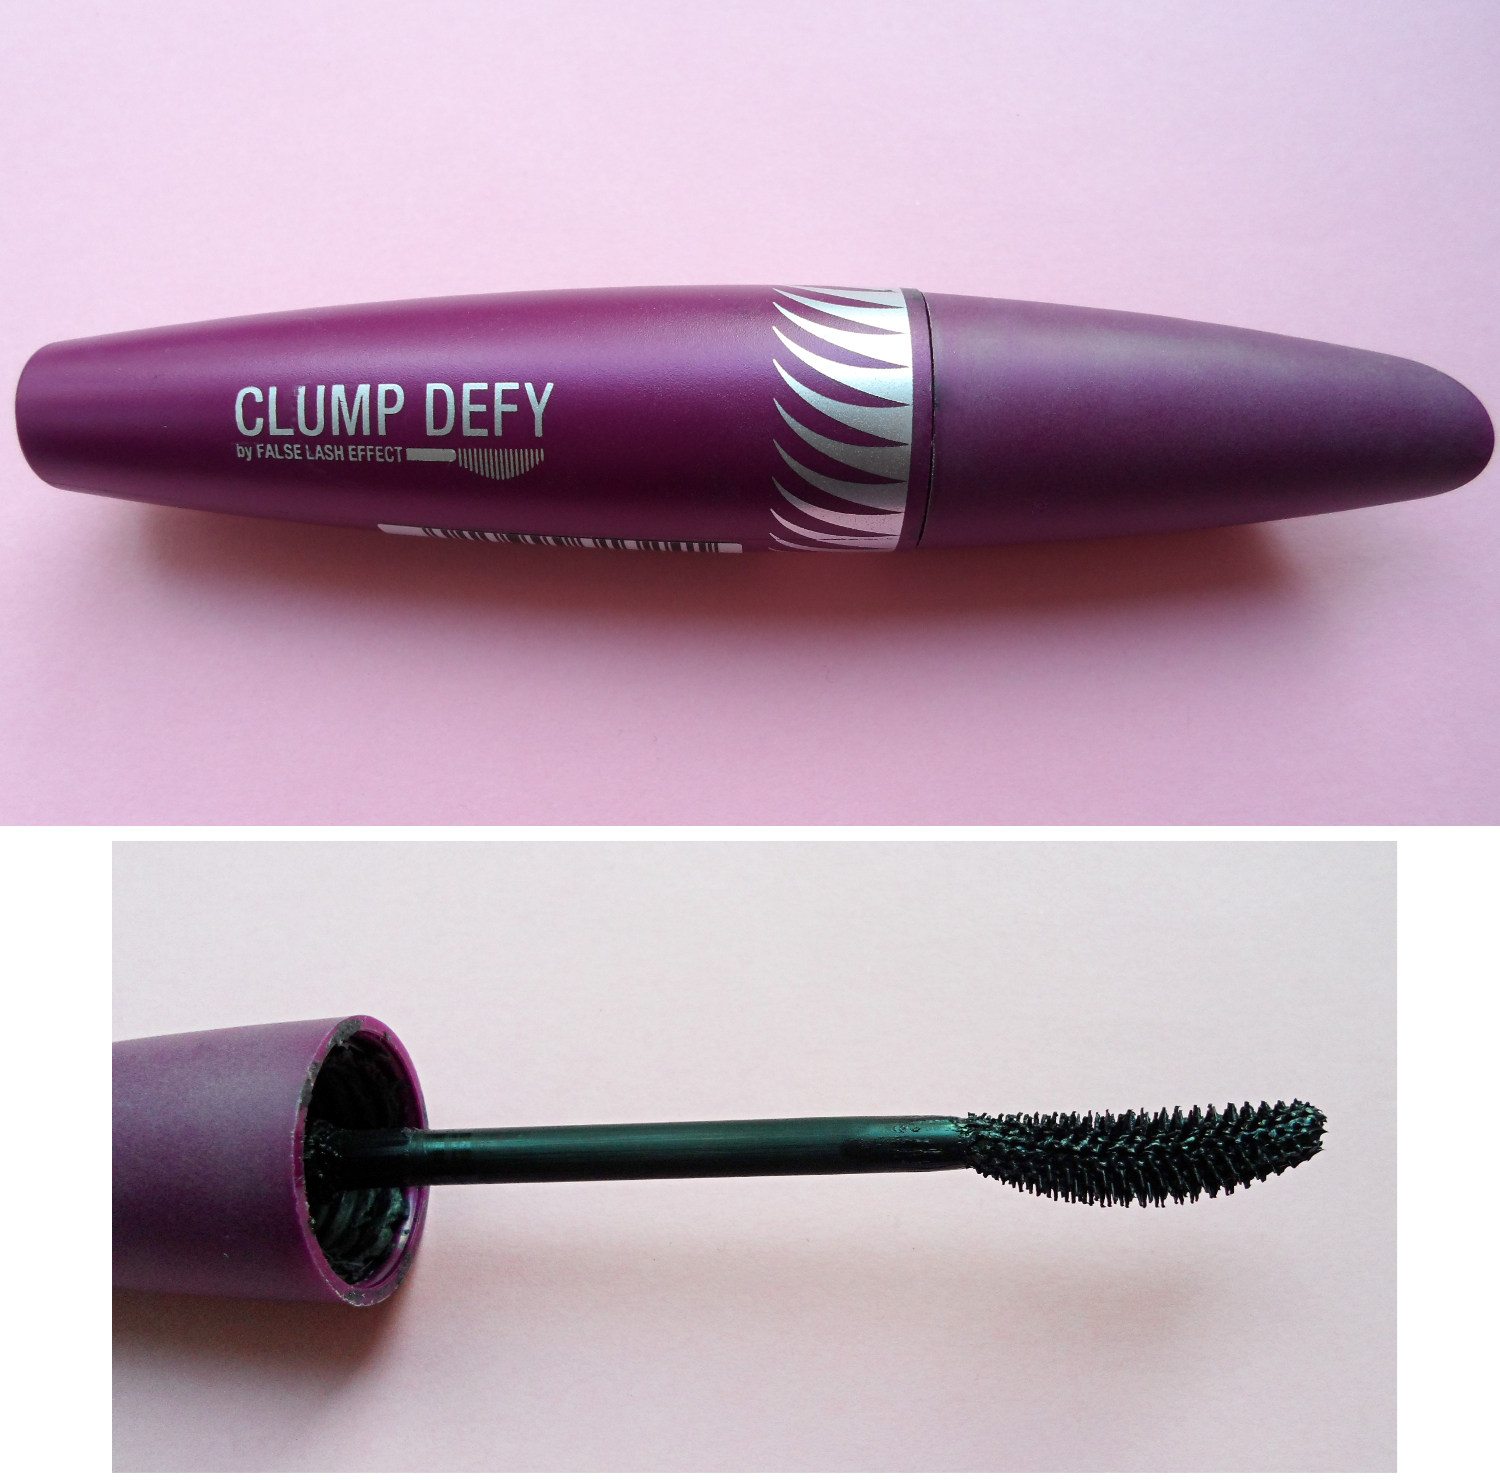 svinekød Pigment undergrundsbane A Clump Defy Mascara by Max Factor for Perfect Lash Separation | Review &  Demo | January Girl